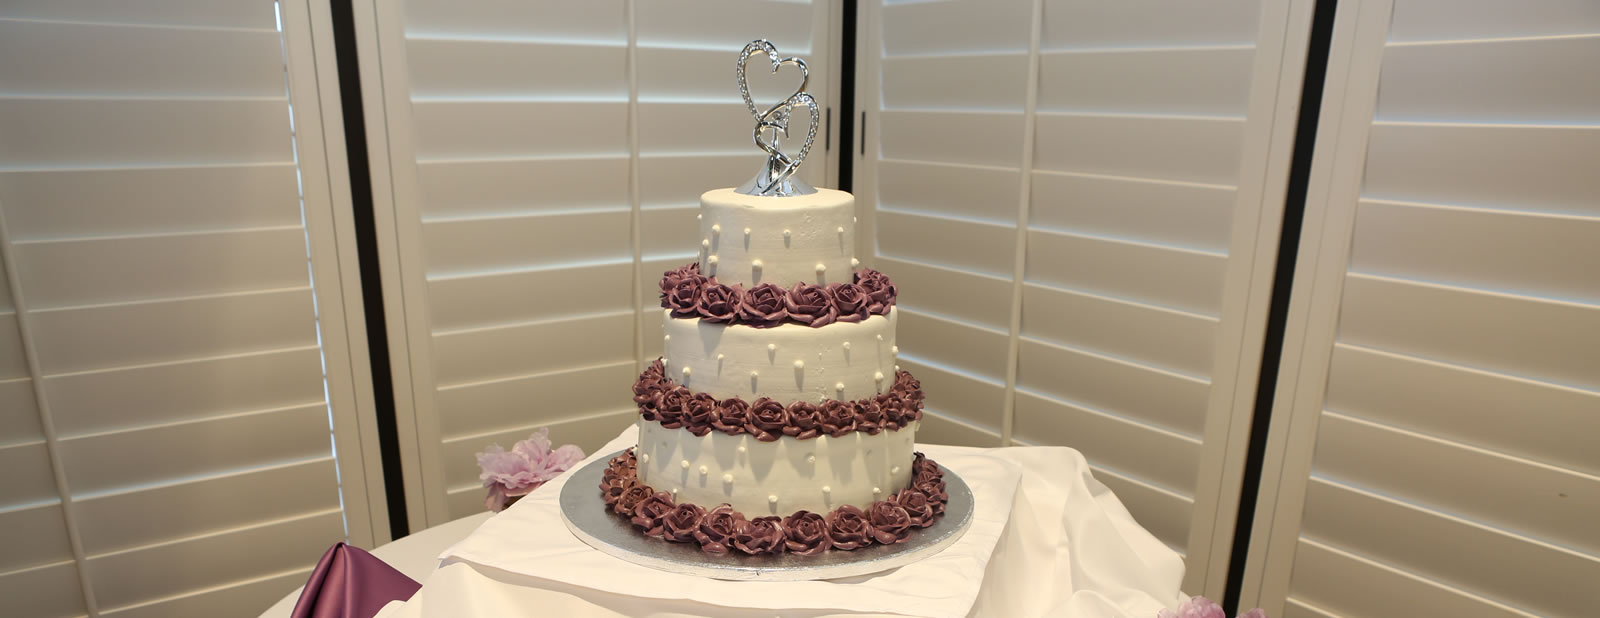 White 3 tier cake with purple roses and silver hearts on top